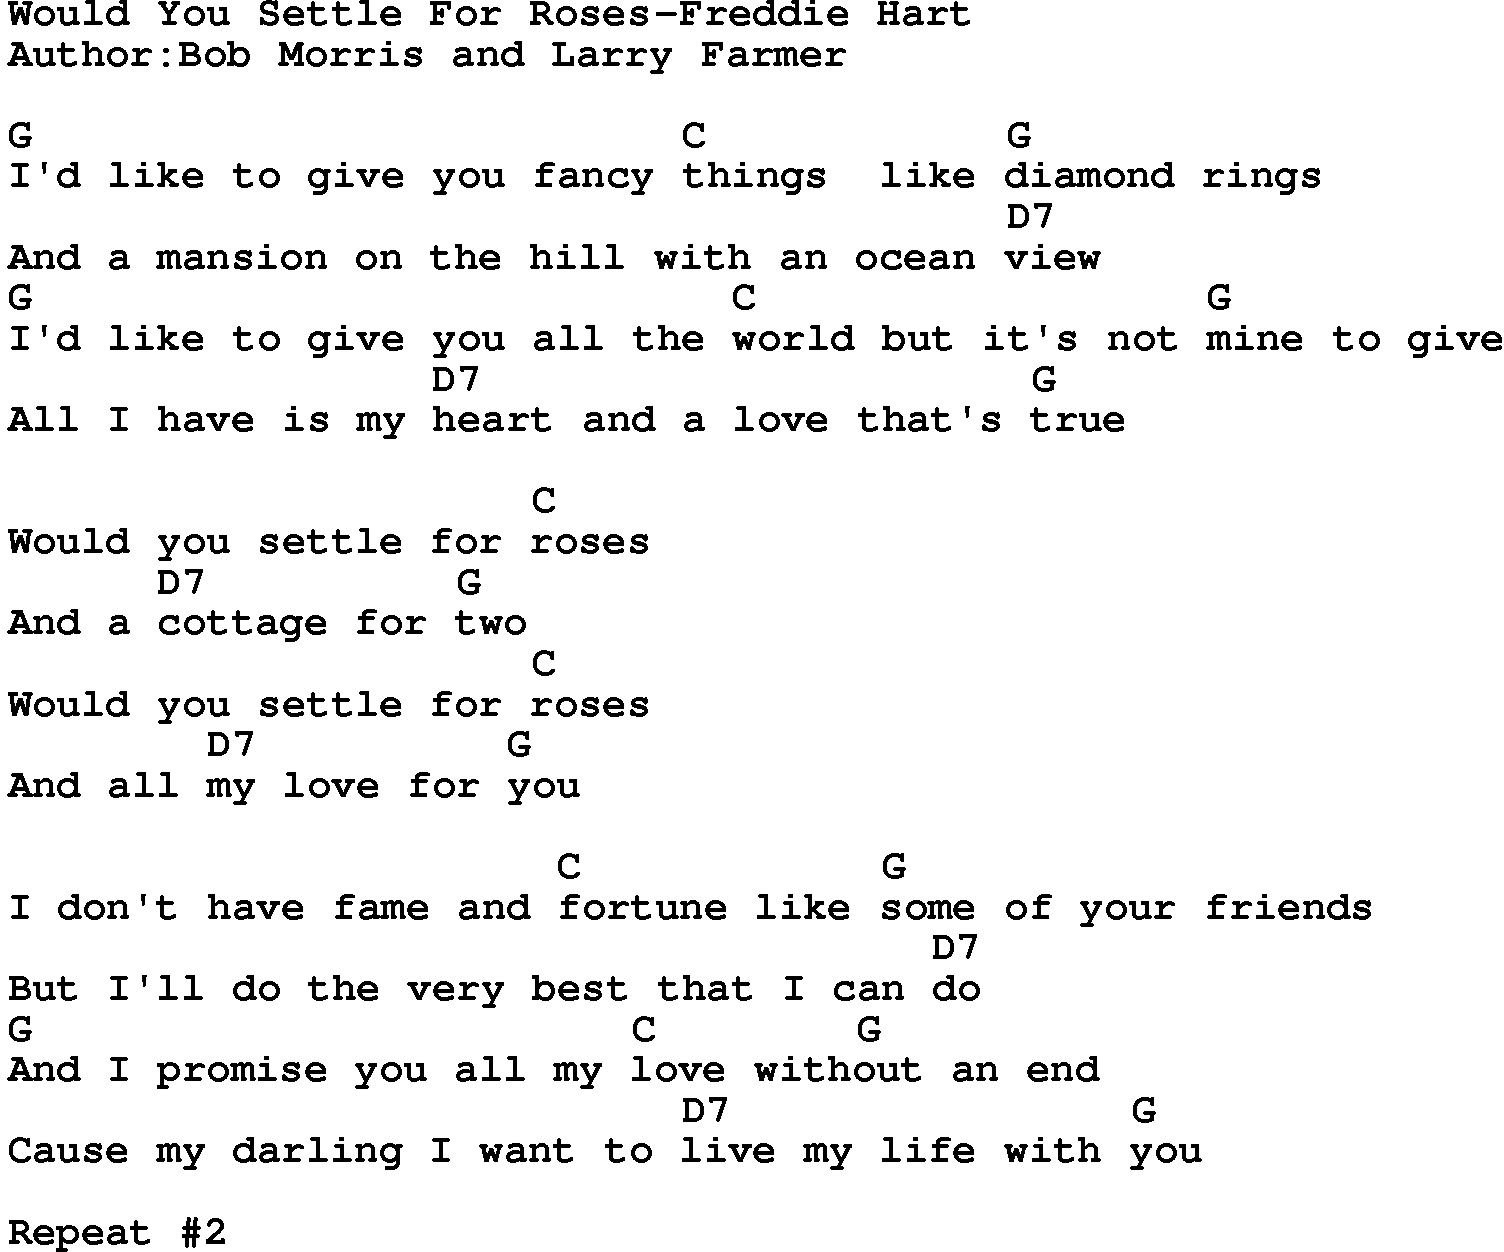 Country music song: Would You Settle For Roses-Freddie Hart lyrics and chords